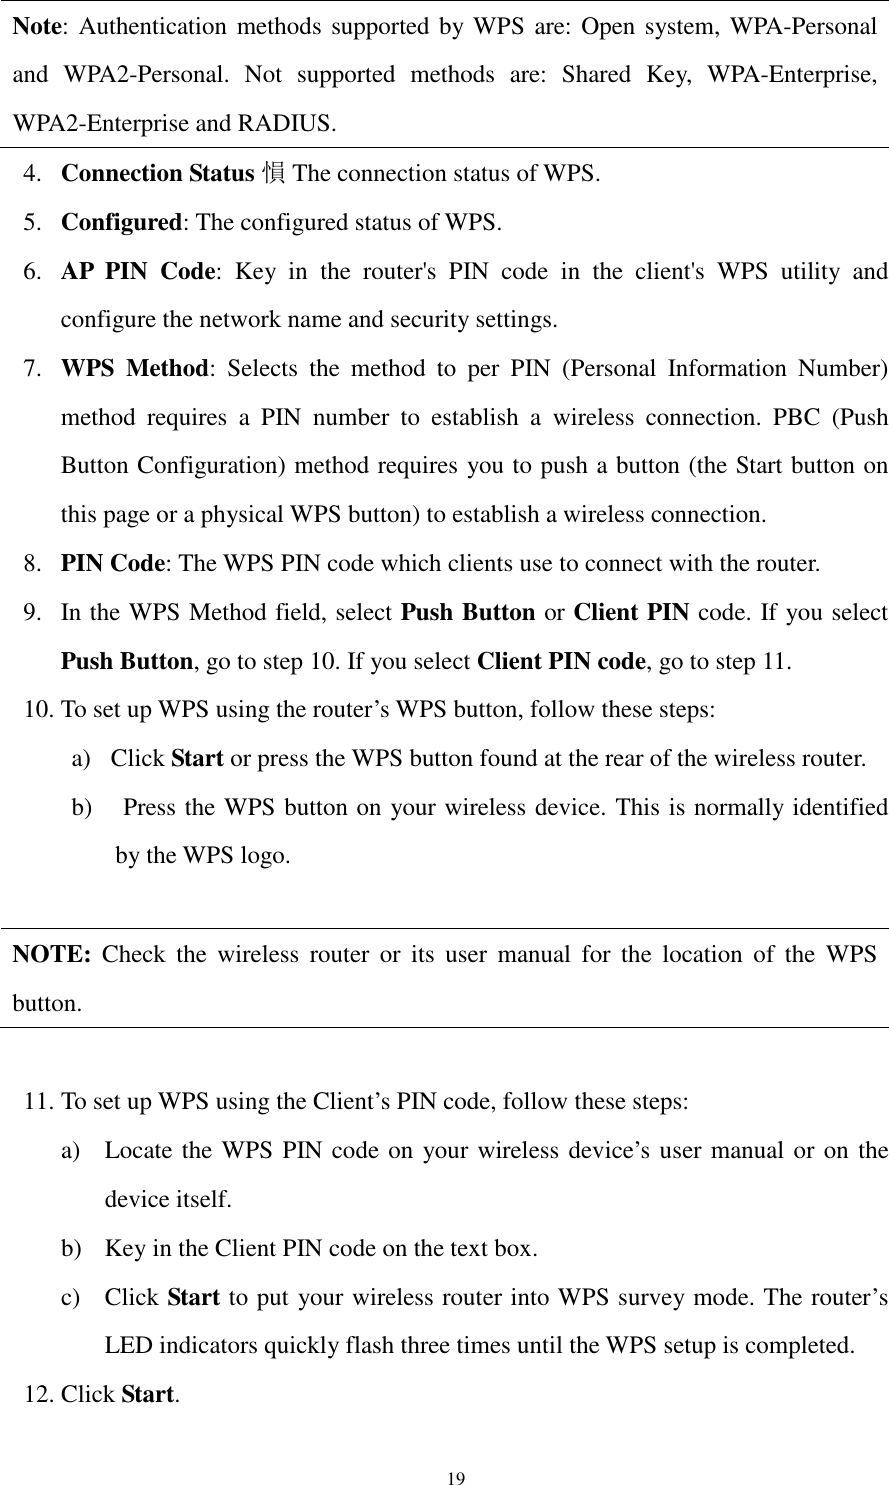  19 Note: Authentication methods supported by WPS are: Open system, WPA-Personal and  WPA2-Personal.  Not  supported  methods  are:  Shared  Key,  WPA-Enterprise, WPA2-Enterprise and RADIUS. 4. Connection Status 愪The connection status of WPS. 5. Configured: The configured status of WPS. 6. AP  PIN  Code:  Key  in  the  router&apos;s  PIN  code  in  the  client&apos;s  WPS  utility  and configure the network name and security settings. 7. WPS  Method:  Selects  the  method  to  per  PIN  (Personal  Information  Number) method  requires  a  PIN  number  to  establish  a  wireless  connection.  PBC  (Push Button Configuration) method requires you to push a button (the Start button on this page or a physical WPS button) to establish a wireless connection. 8. PIN Code: The WPS PIN code which clients use to connect with the router. 9. In the WPS Method field, select Push Button or Client PIN code. If you select Push Button, go to step 10. If you select Client PIN code, go to step 11. 10. To set up WPS using the router’s WPS button, follow these steps: a) Click Start or press the WPS button found at the rear of the wireless router. b)   Press the WPS button on your wireless device. This is normally identified by the WPS logo.  NOTE:  Check  the  wireless  router  or  its  user  manual  for  the  location  of  the  WPS button.  11. To set up WPS using the Client’s PIN code, follow these steps: a) Locate the WPS PIN code on your wireless device’s user manual or on the device itself. b) Key in the Client PIN code on the text box. c) Click Start to put your wireless router into WPS survey mode. The router’s LED indicators quickly flash three times until the WPS setup is completed. 12. Click Start.   